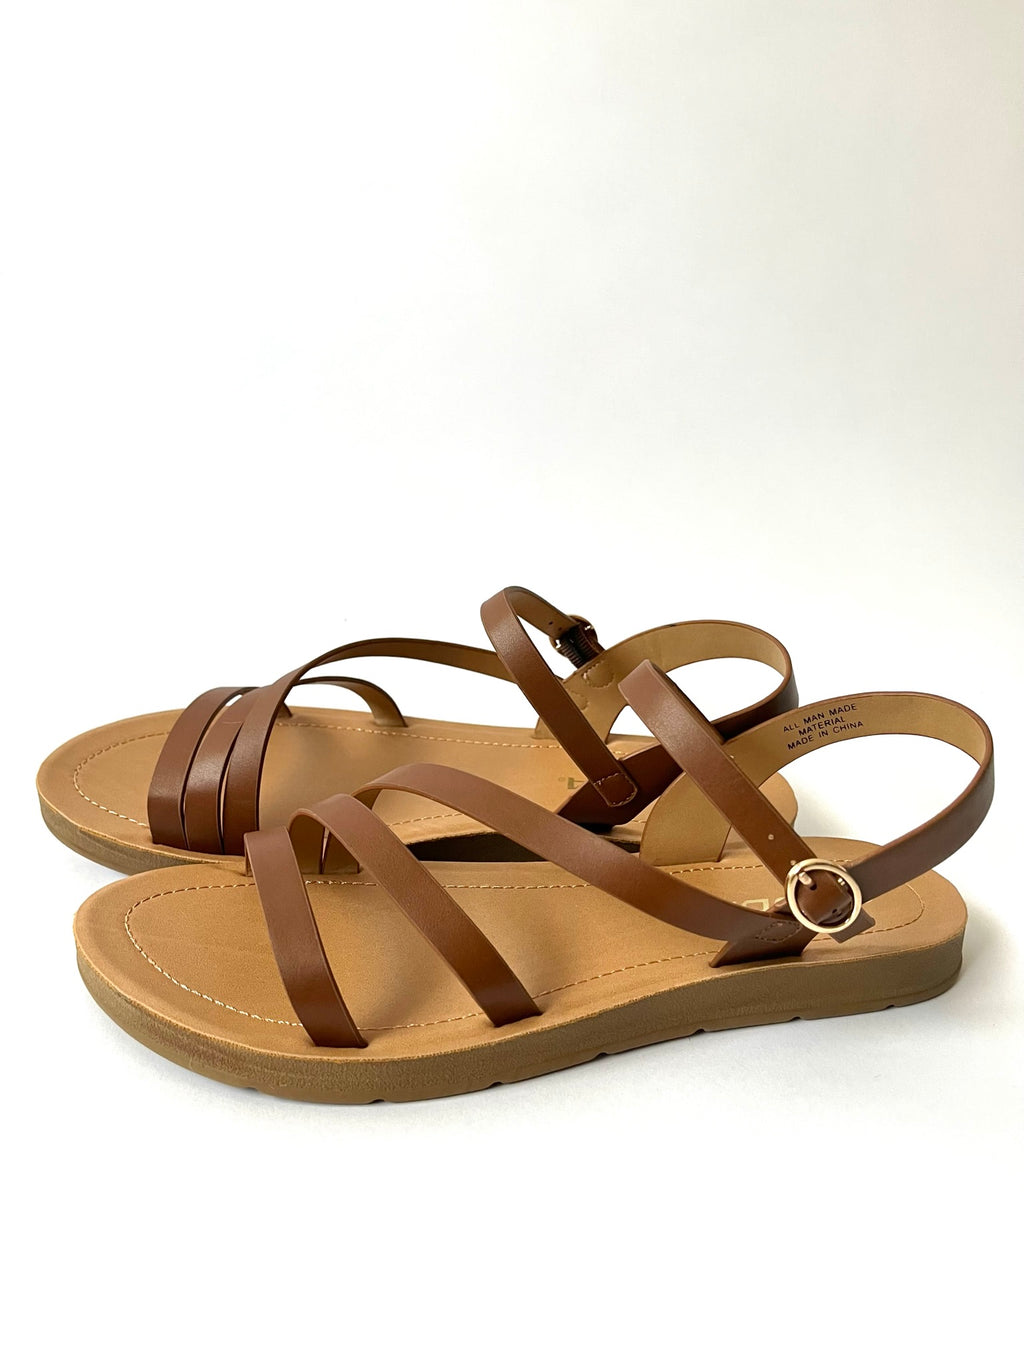 The Lydia Sandals